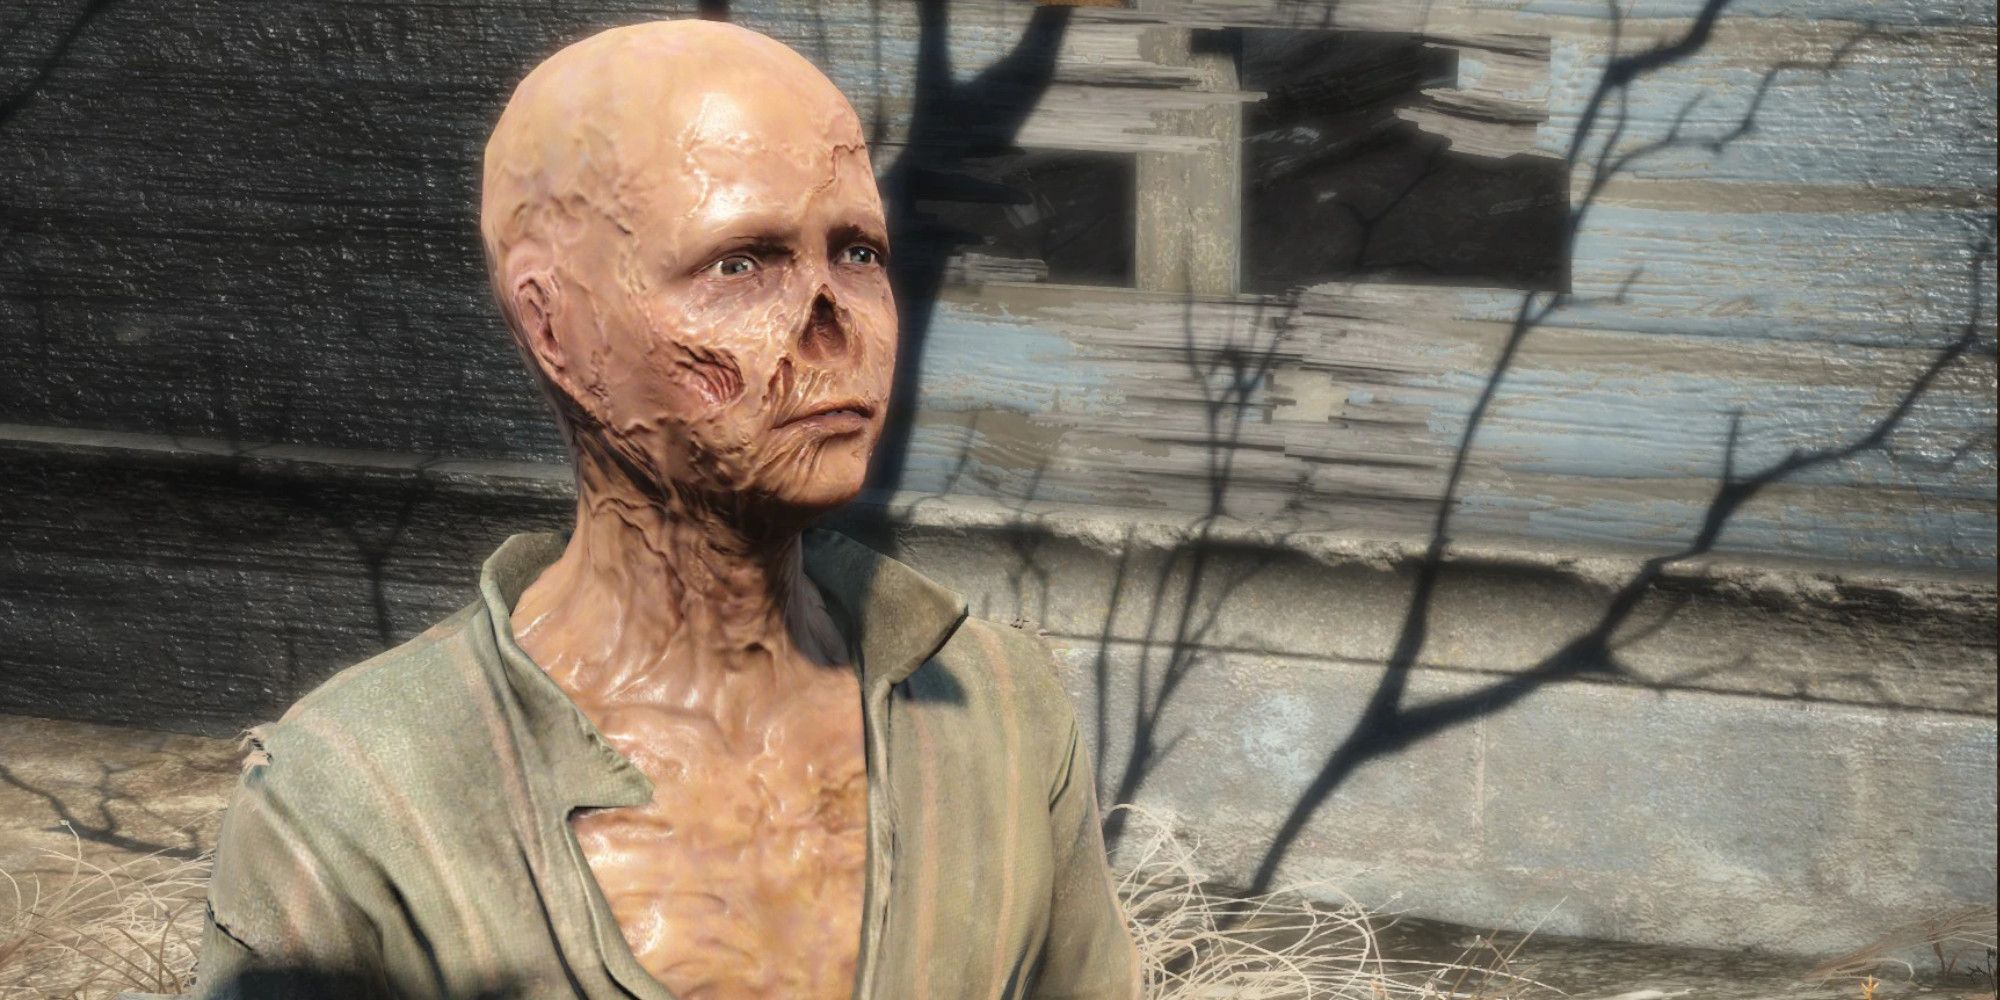 Billy, a Ghoul child, talks to the protagonist in Fallout 4